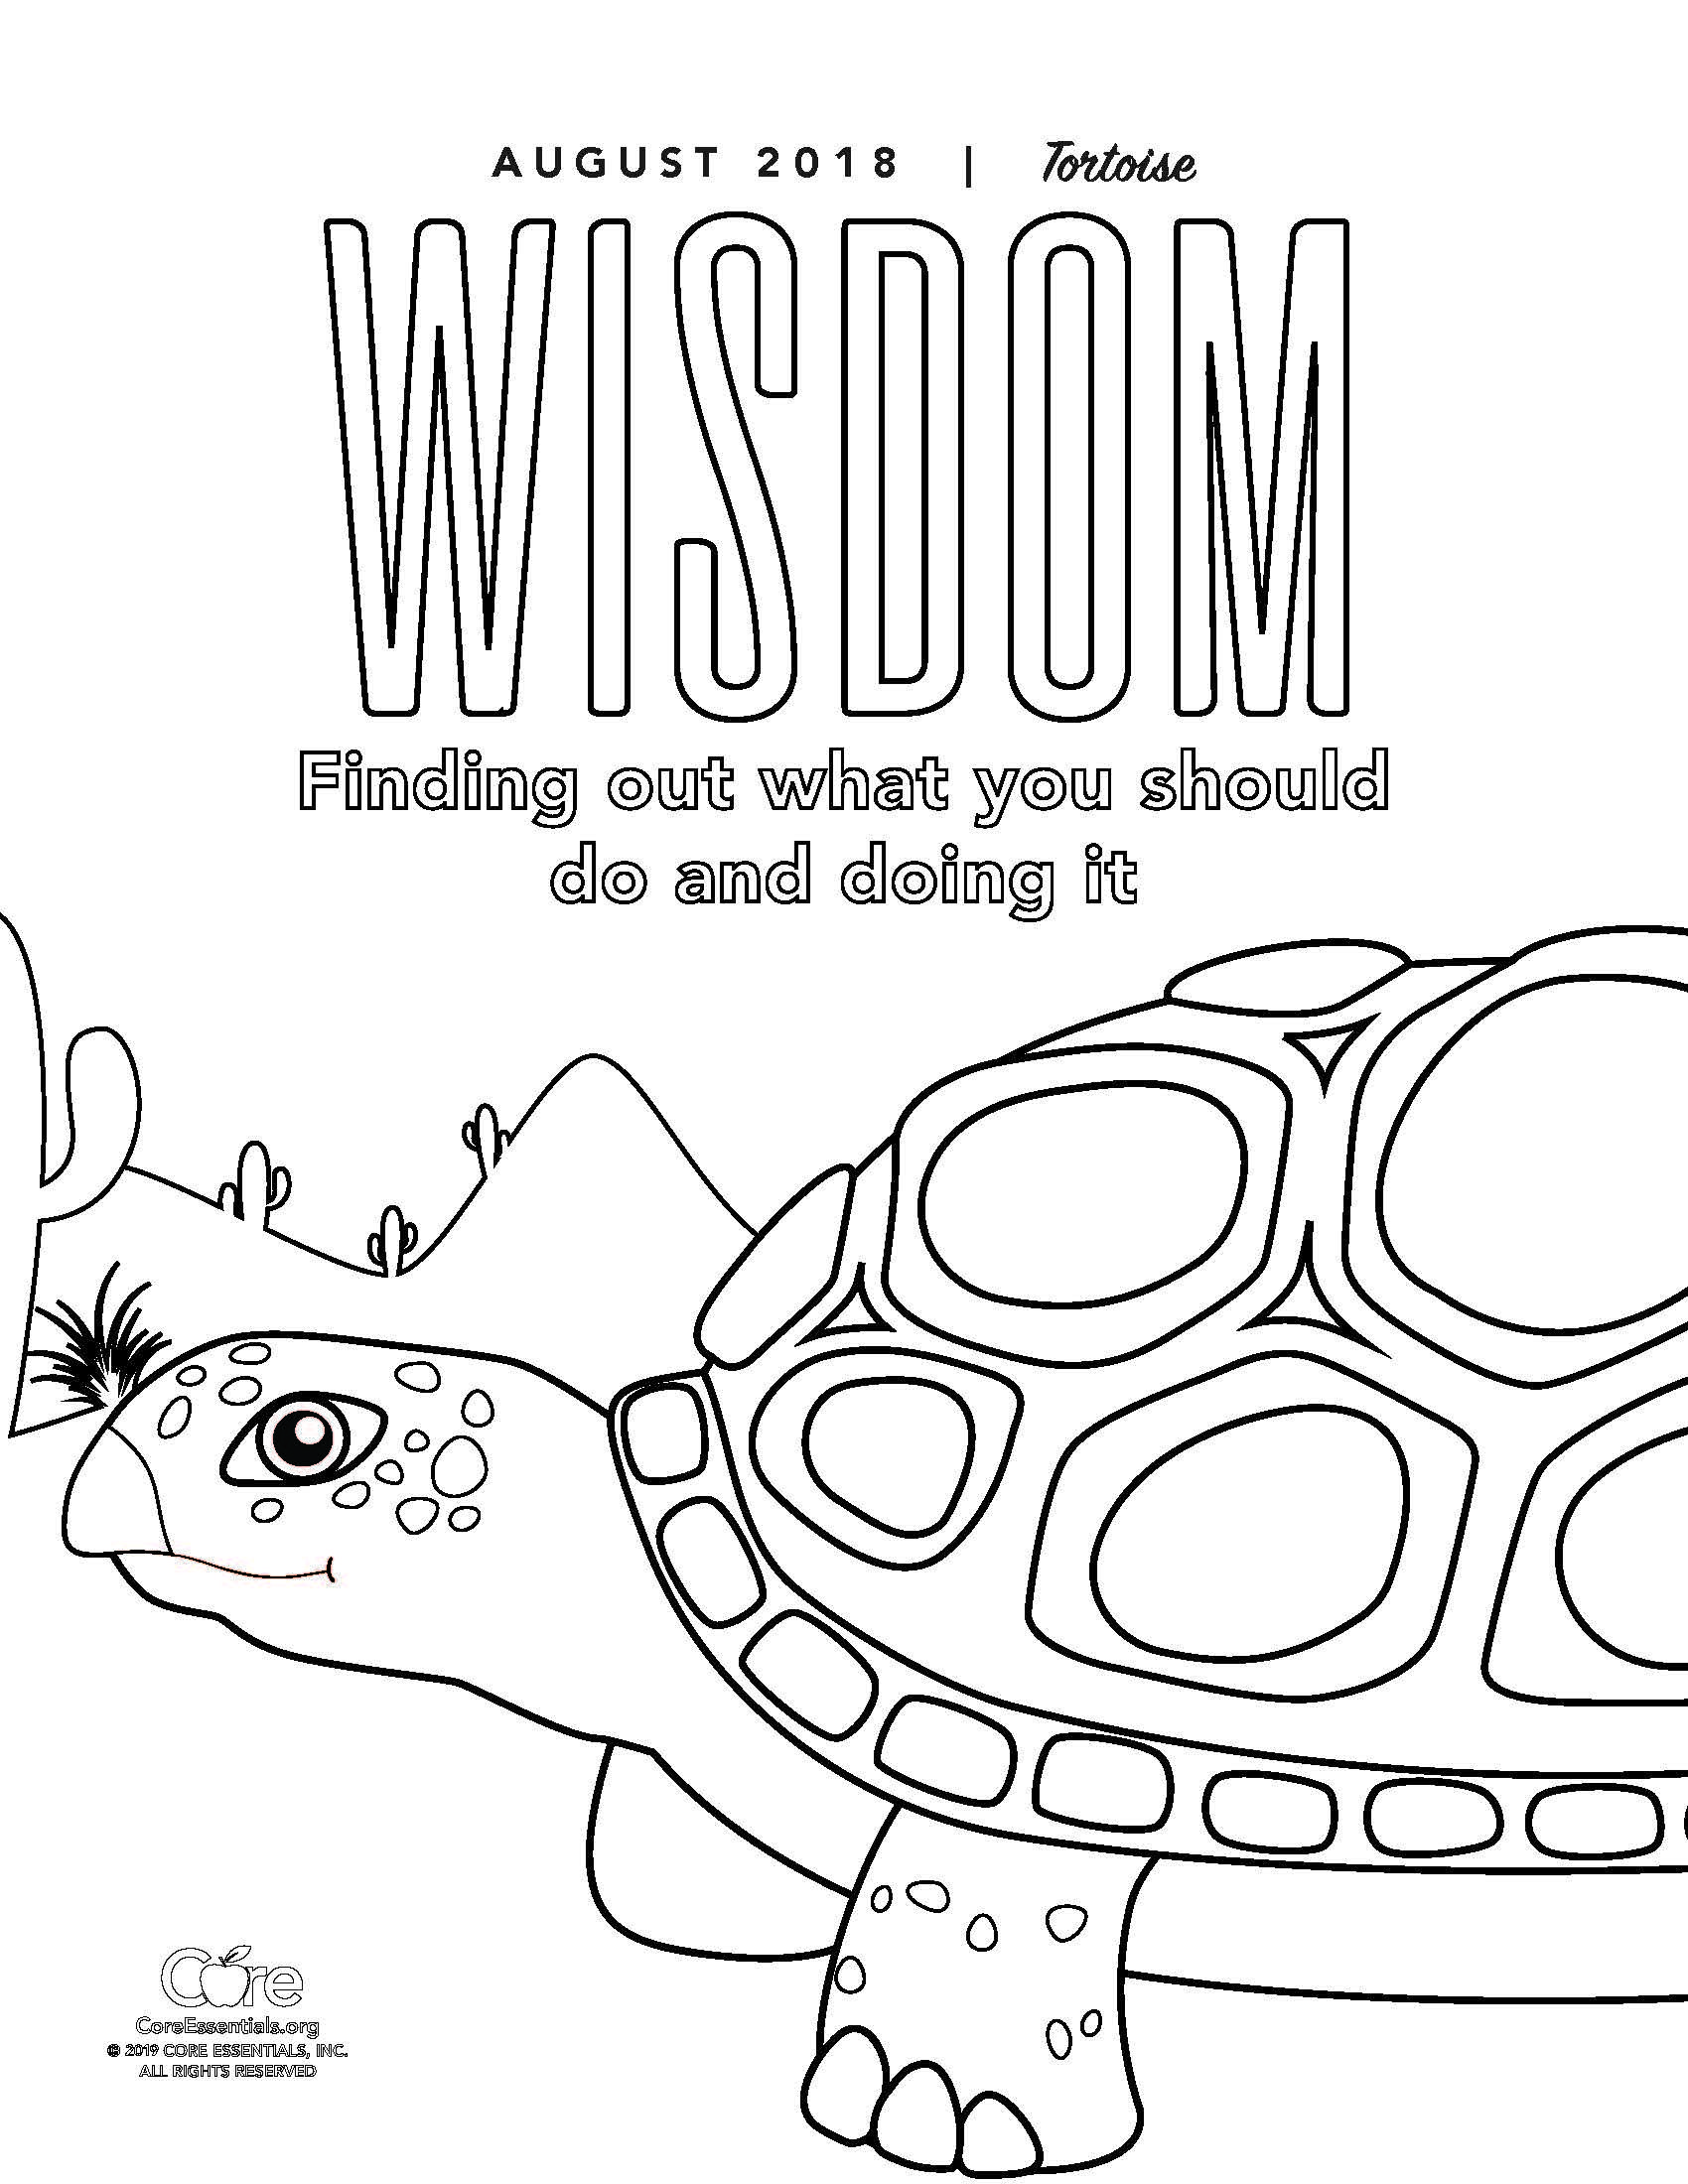 Wisdom Coloring Page | Wisdom, Words, Coloring pages